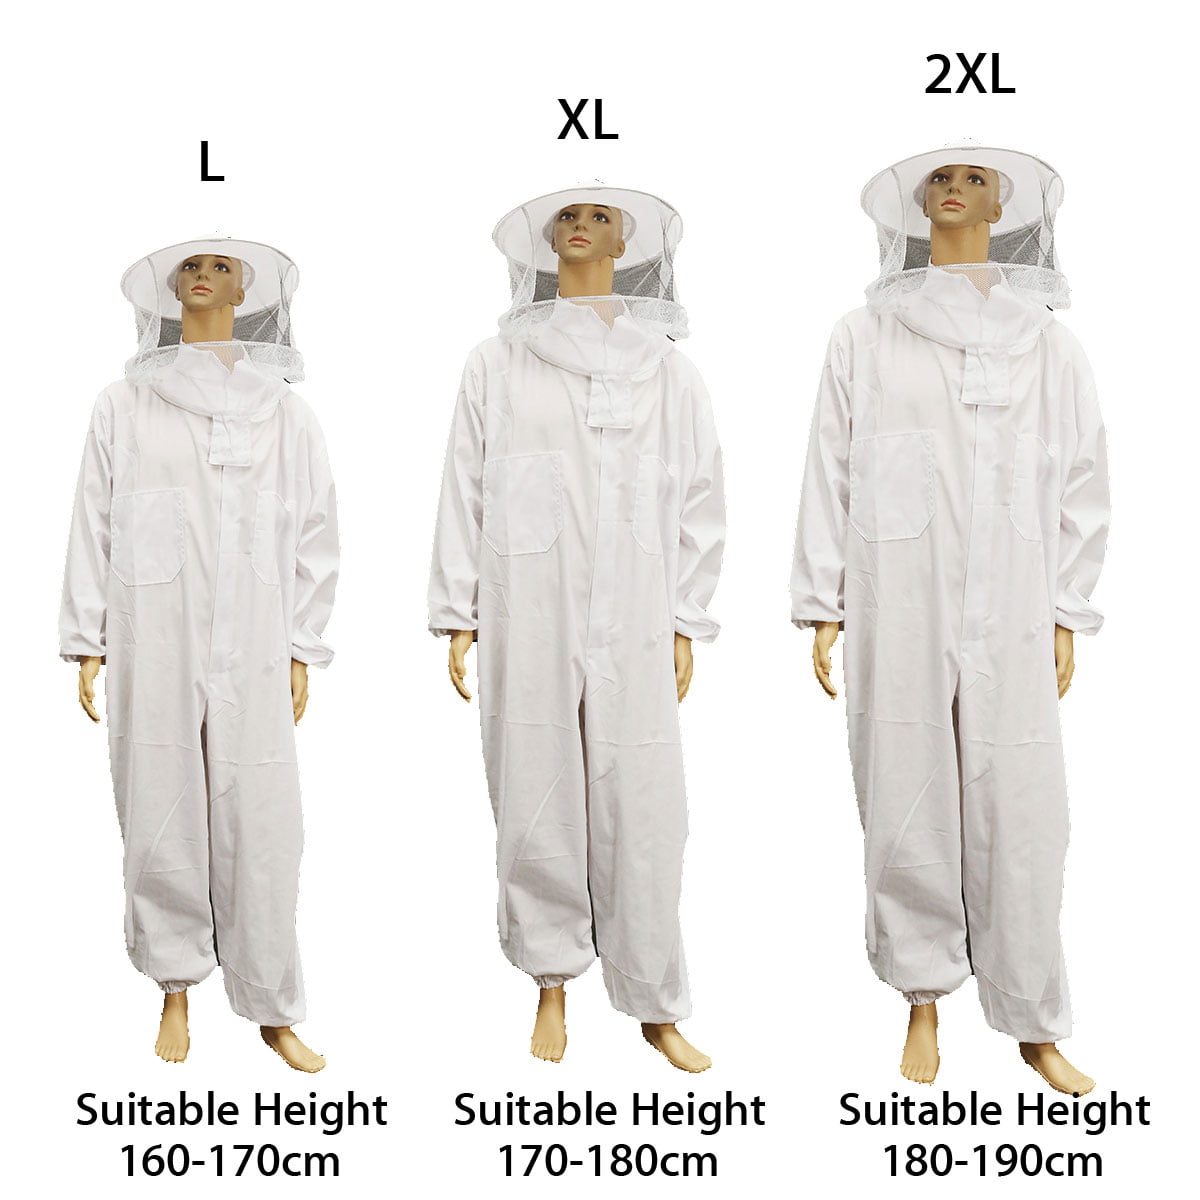 Goodland Bee Supply Glfsxxl Professional Beekeeping Protective Full Body Suit & for sale online 